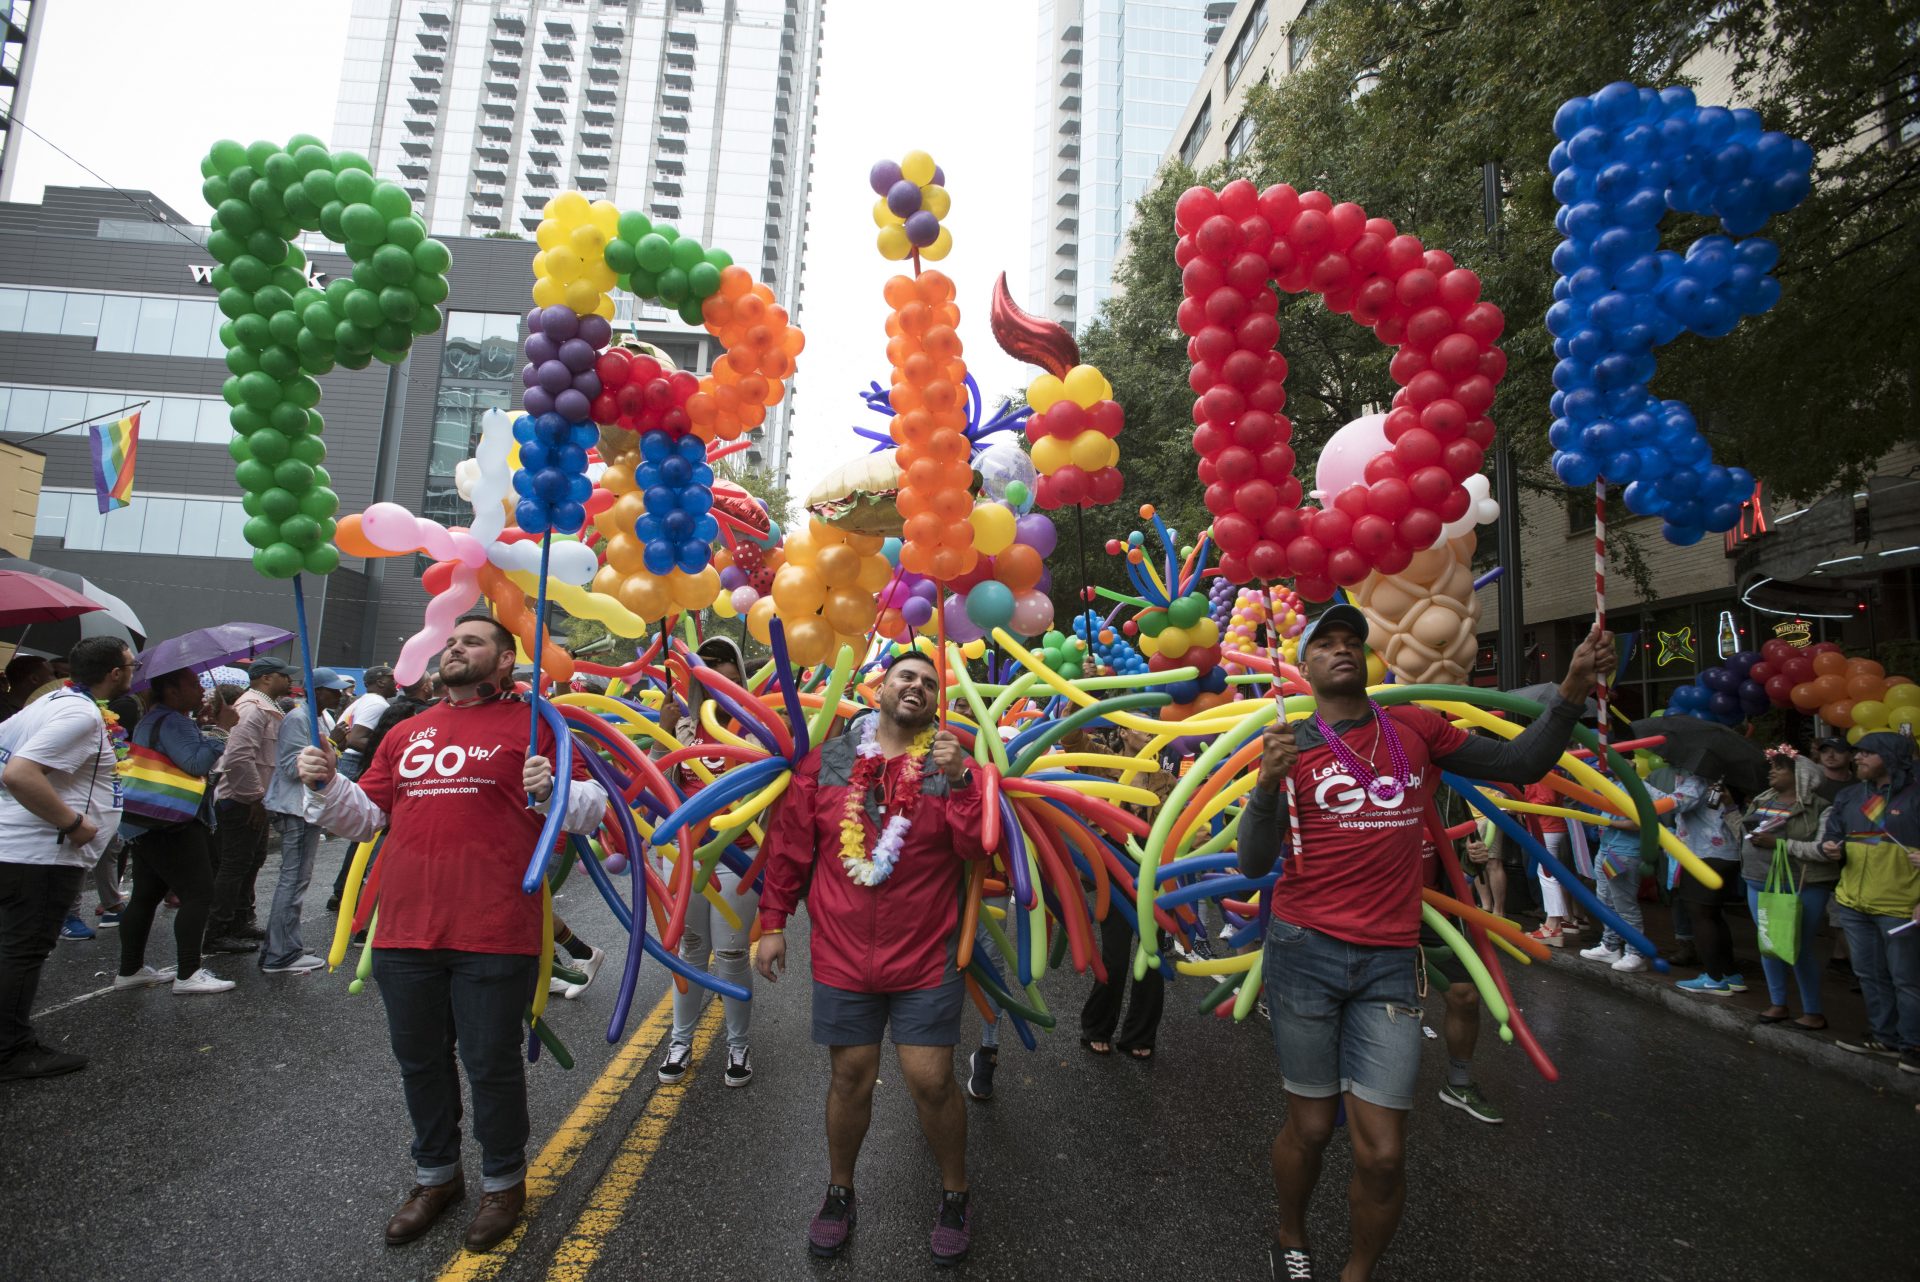 Employees from a local business supporting LGBTQ rights march during the city's annual Gay Pride parade on Sunday, Oct. 13, 2019, in Atlanta.